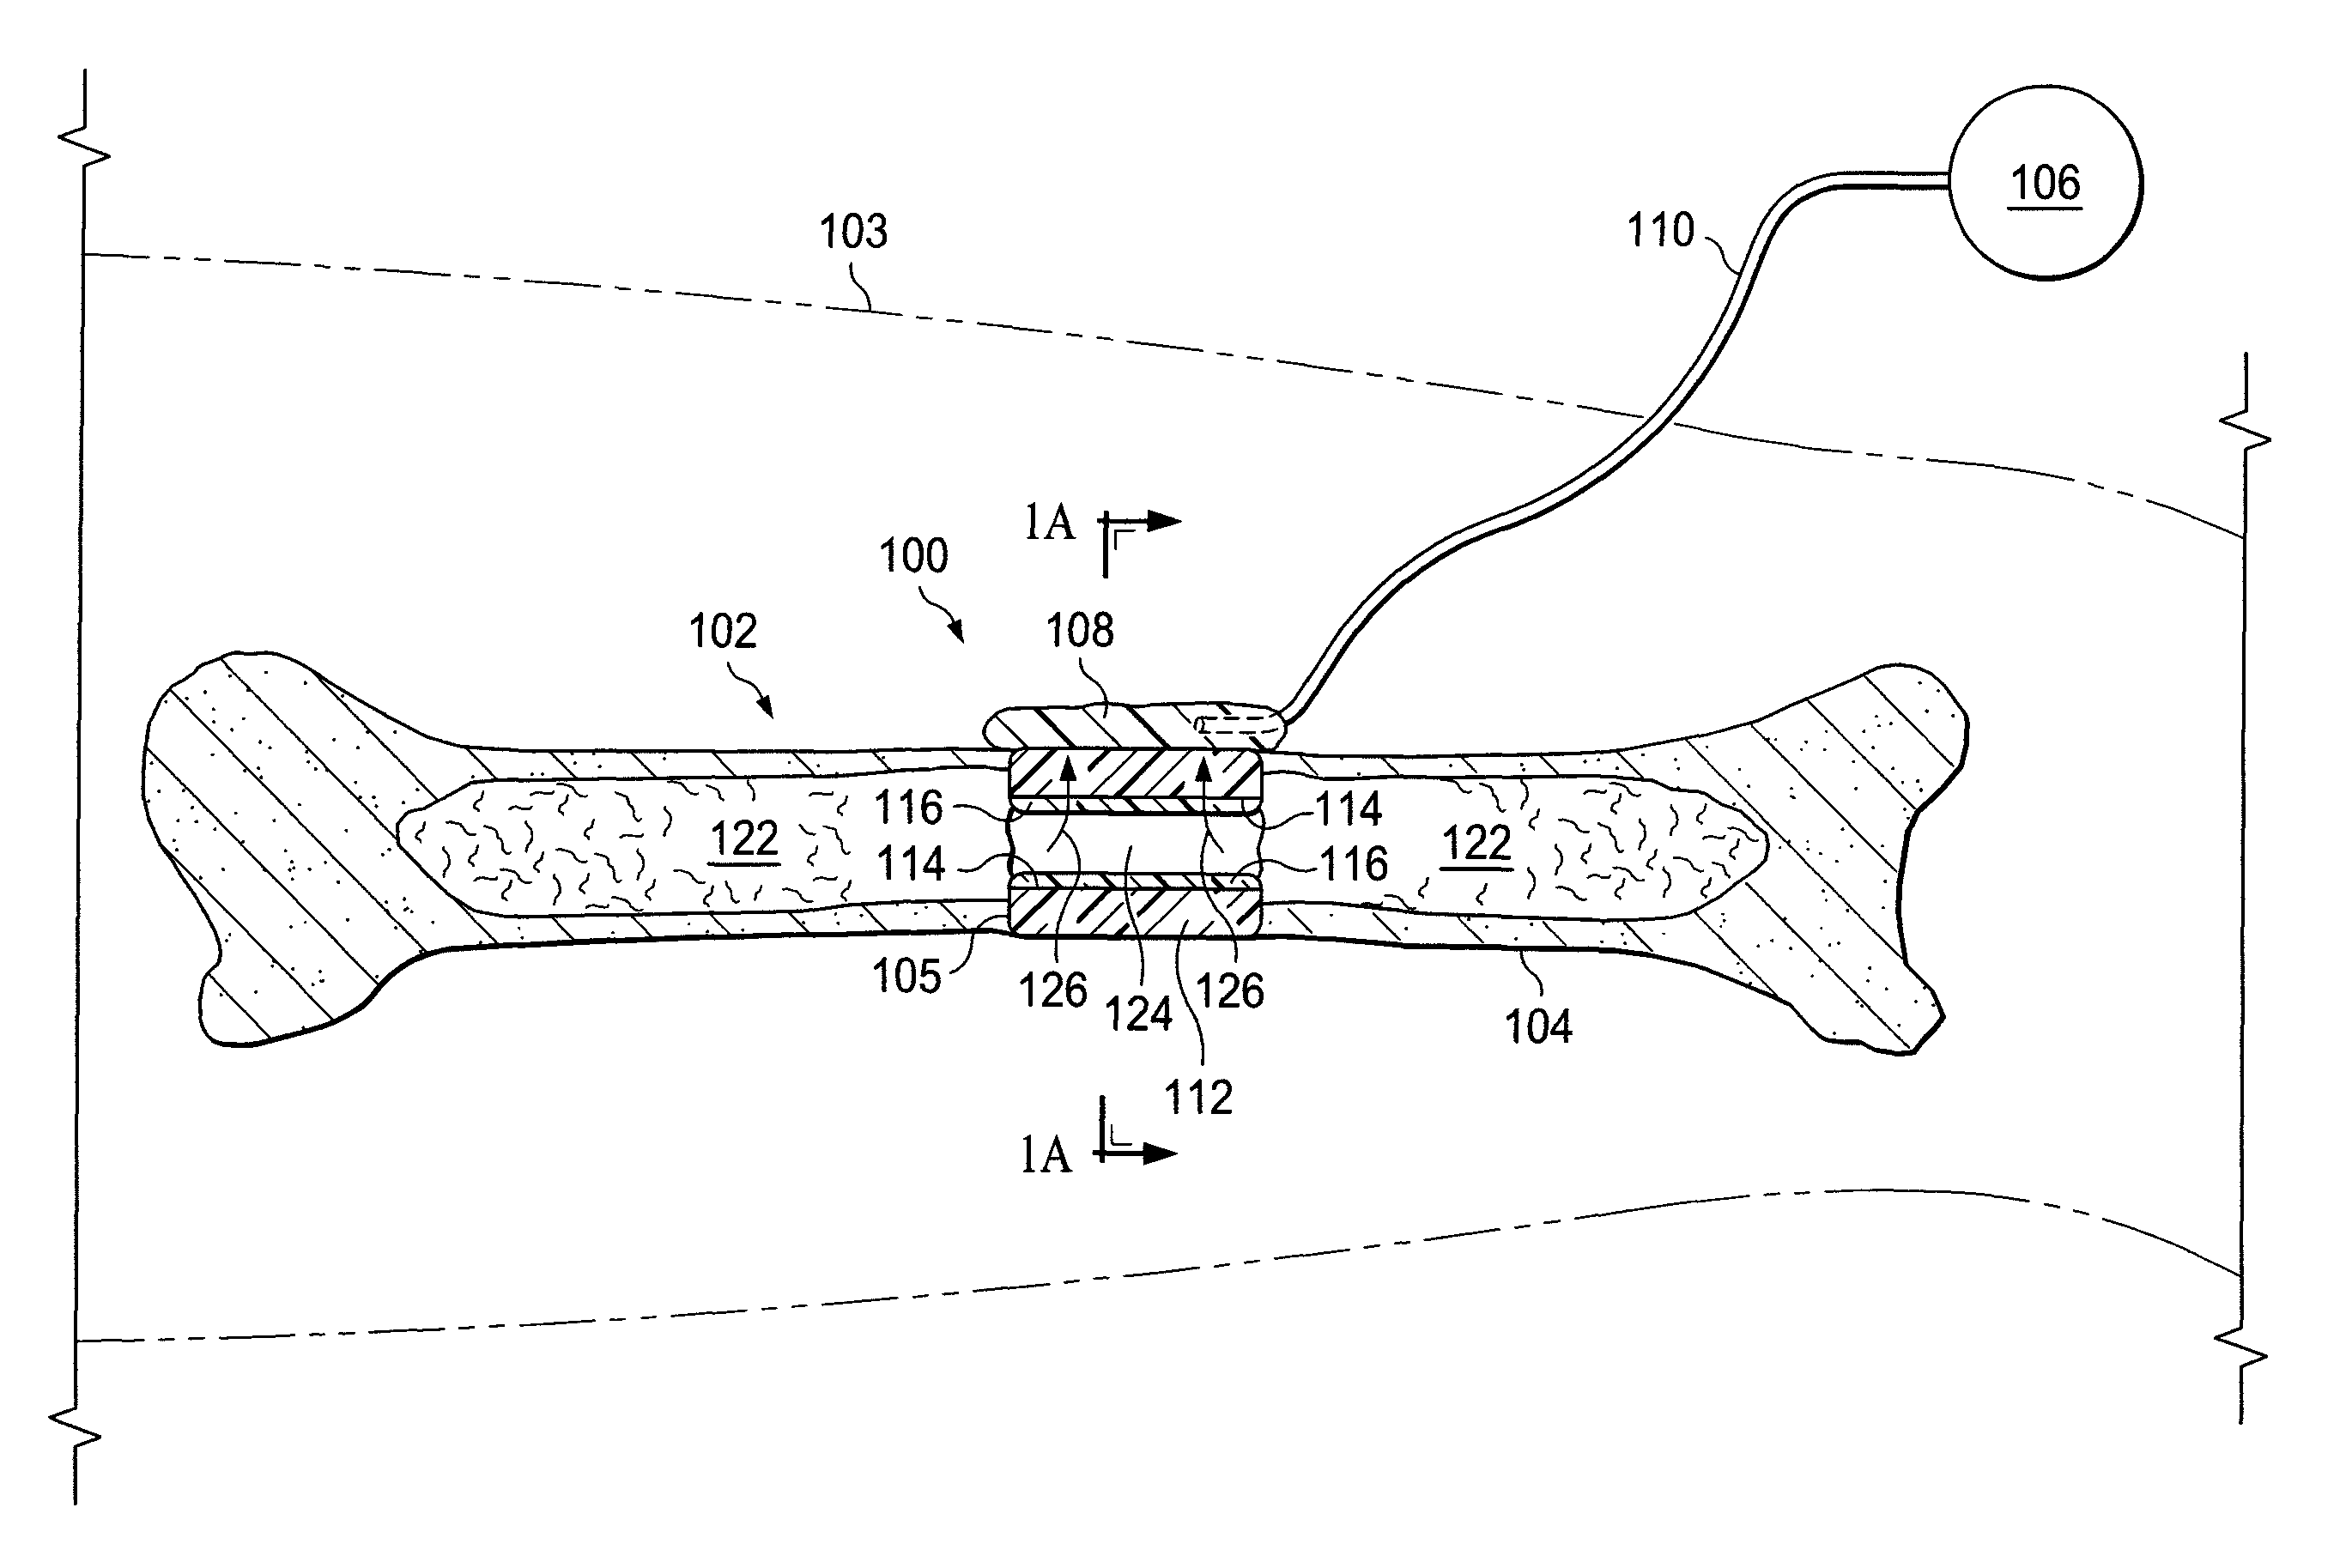 Systems for providing fluid flow to tissues